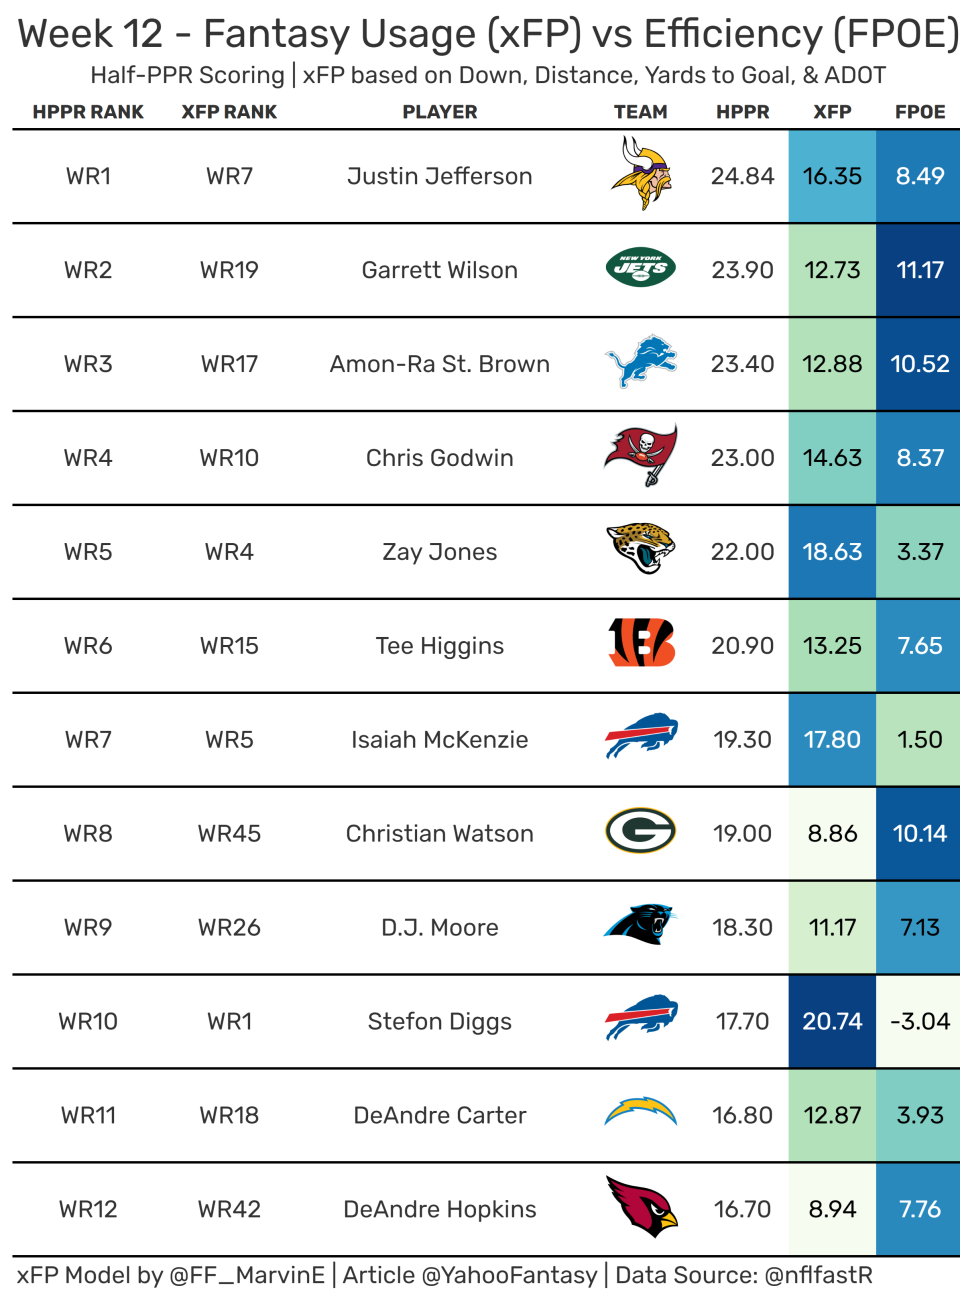 Top-12 Fantasy Wide Receivers from Week 12. (Data used provided by nflfastR)